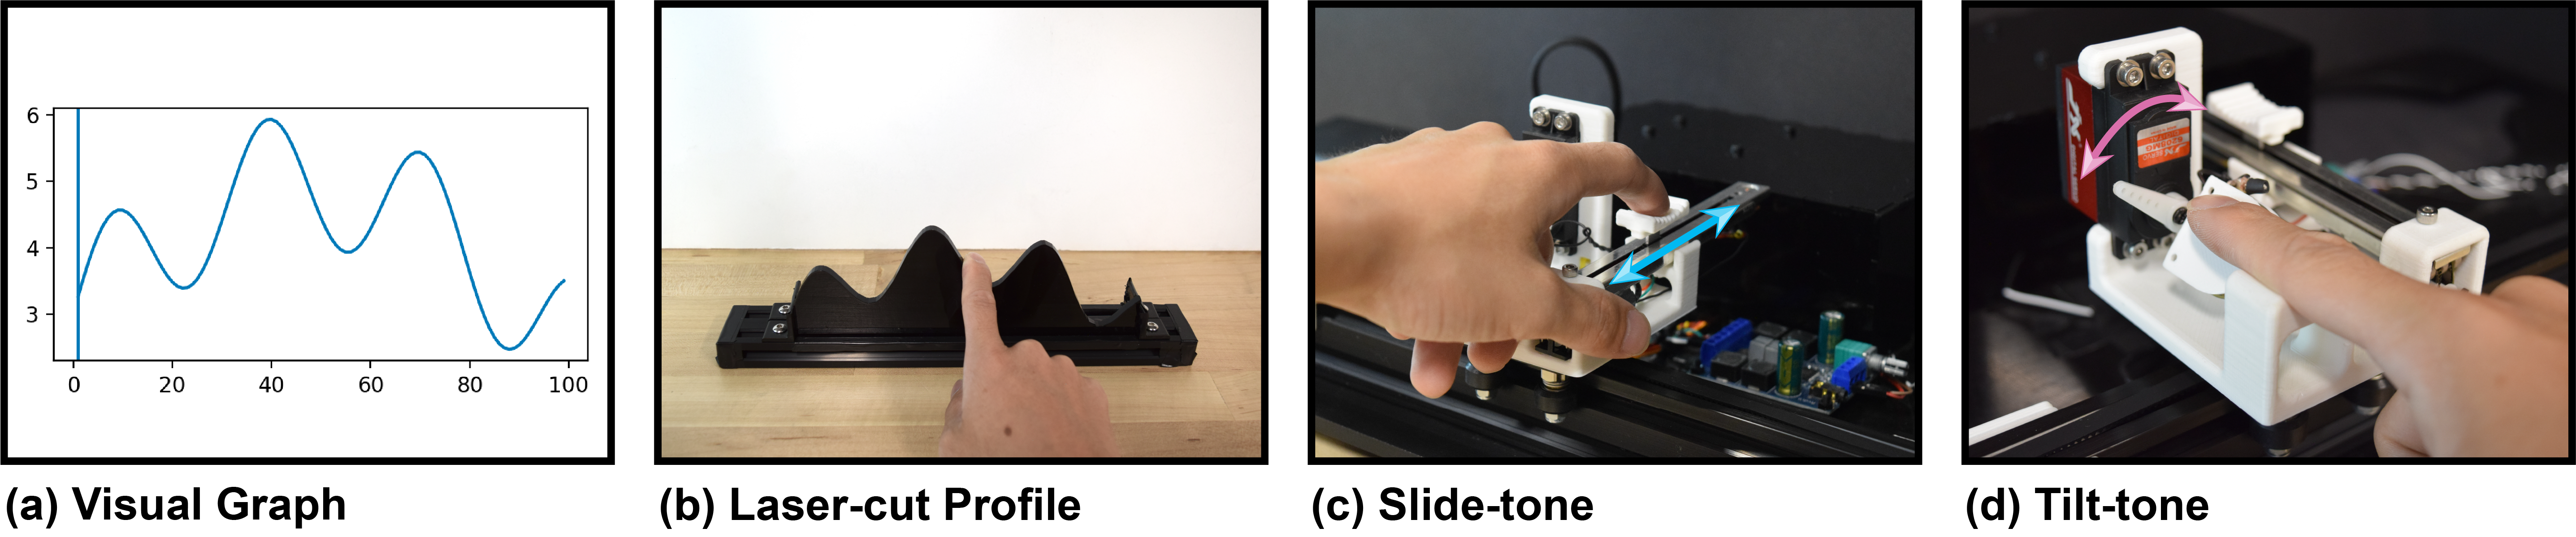 From left to right: 1. an example graph with multiple hills and valleys, 2. a laser-cut profile of the same graph, 3. the sliding mechanism for the haptic device, and 3. the tilting mechanism for the haptic device.